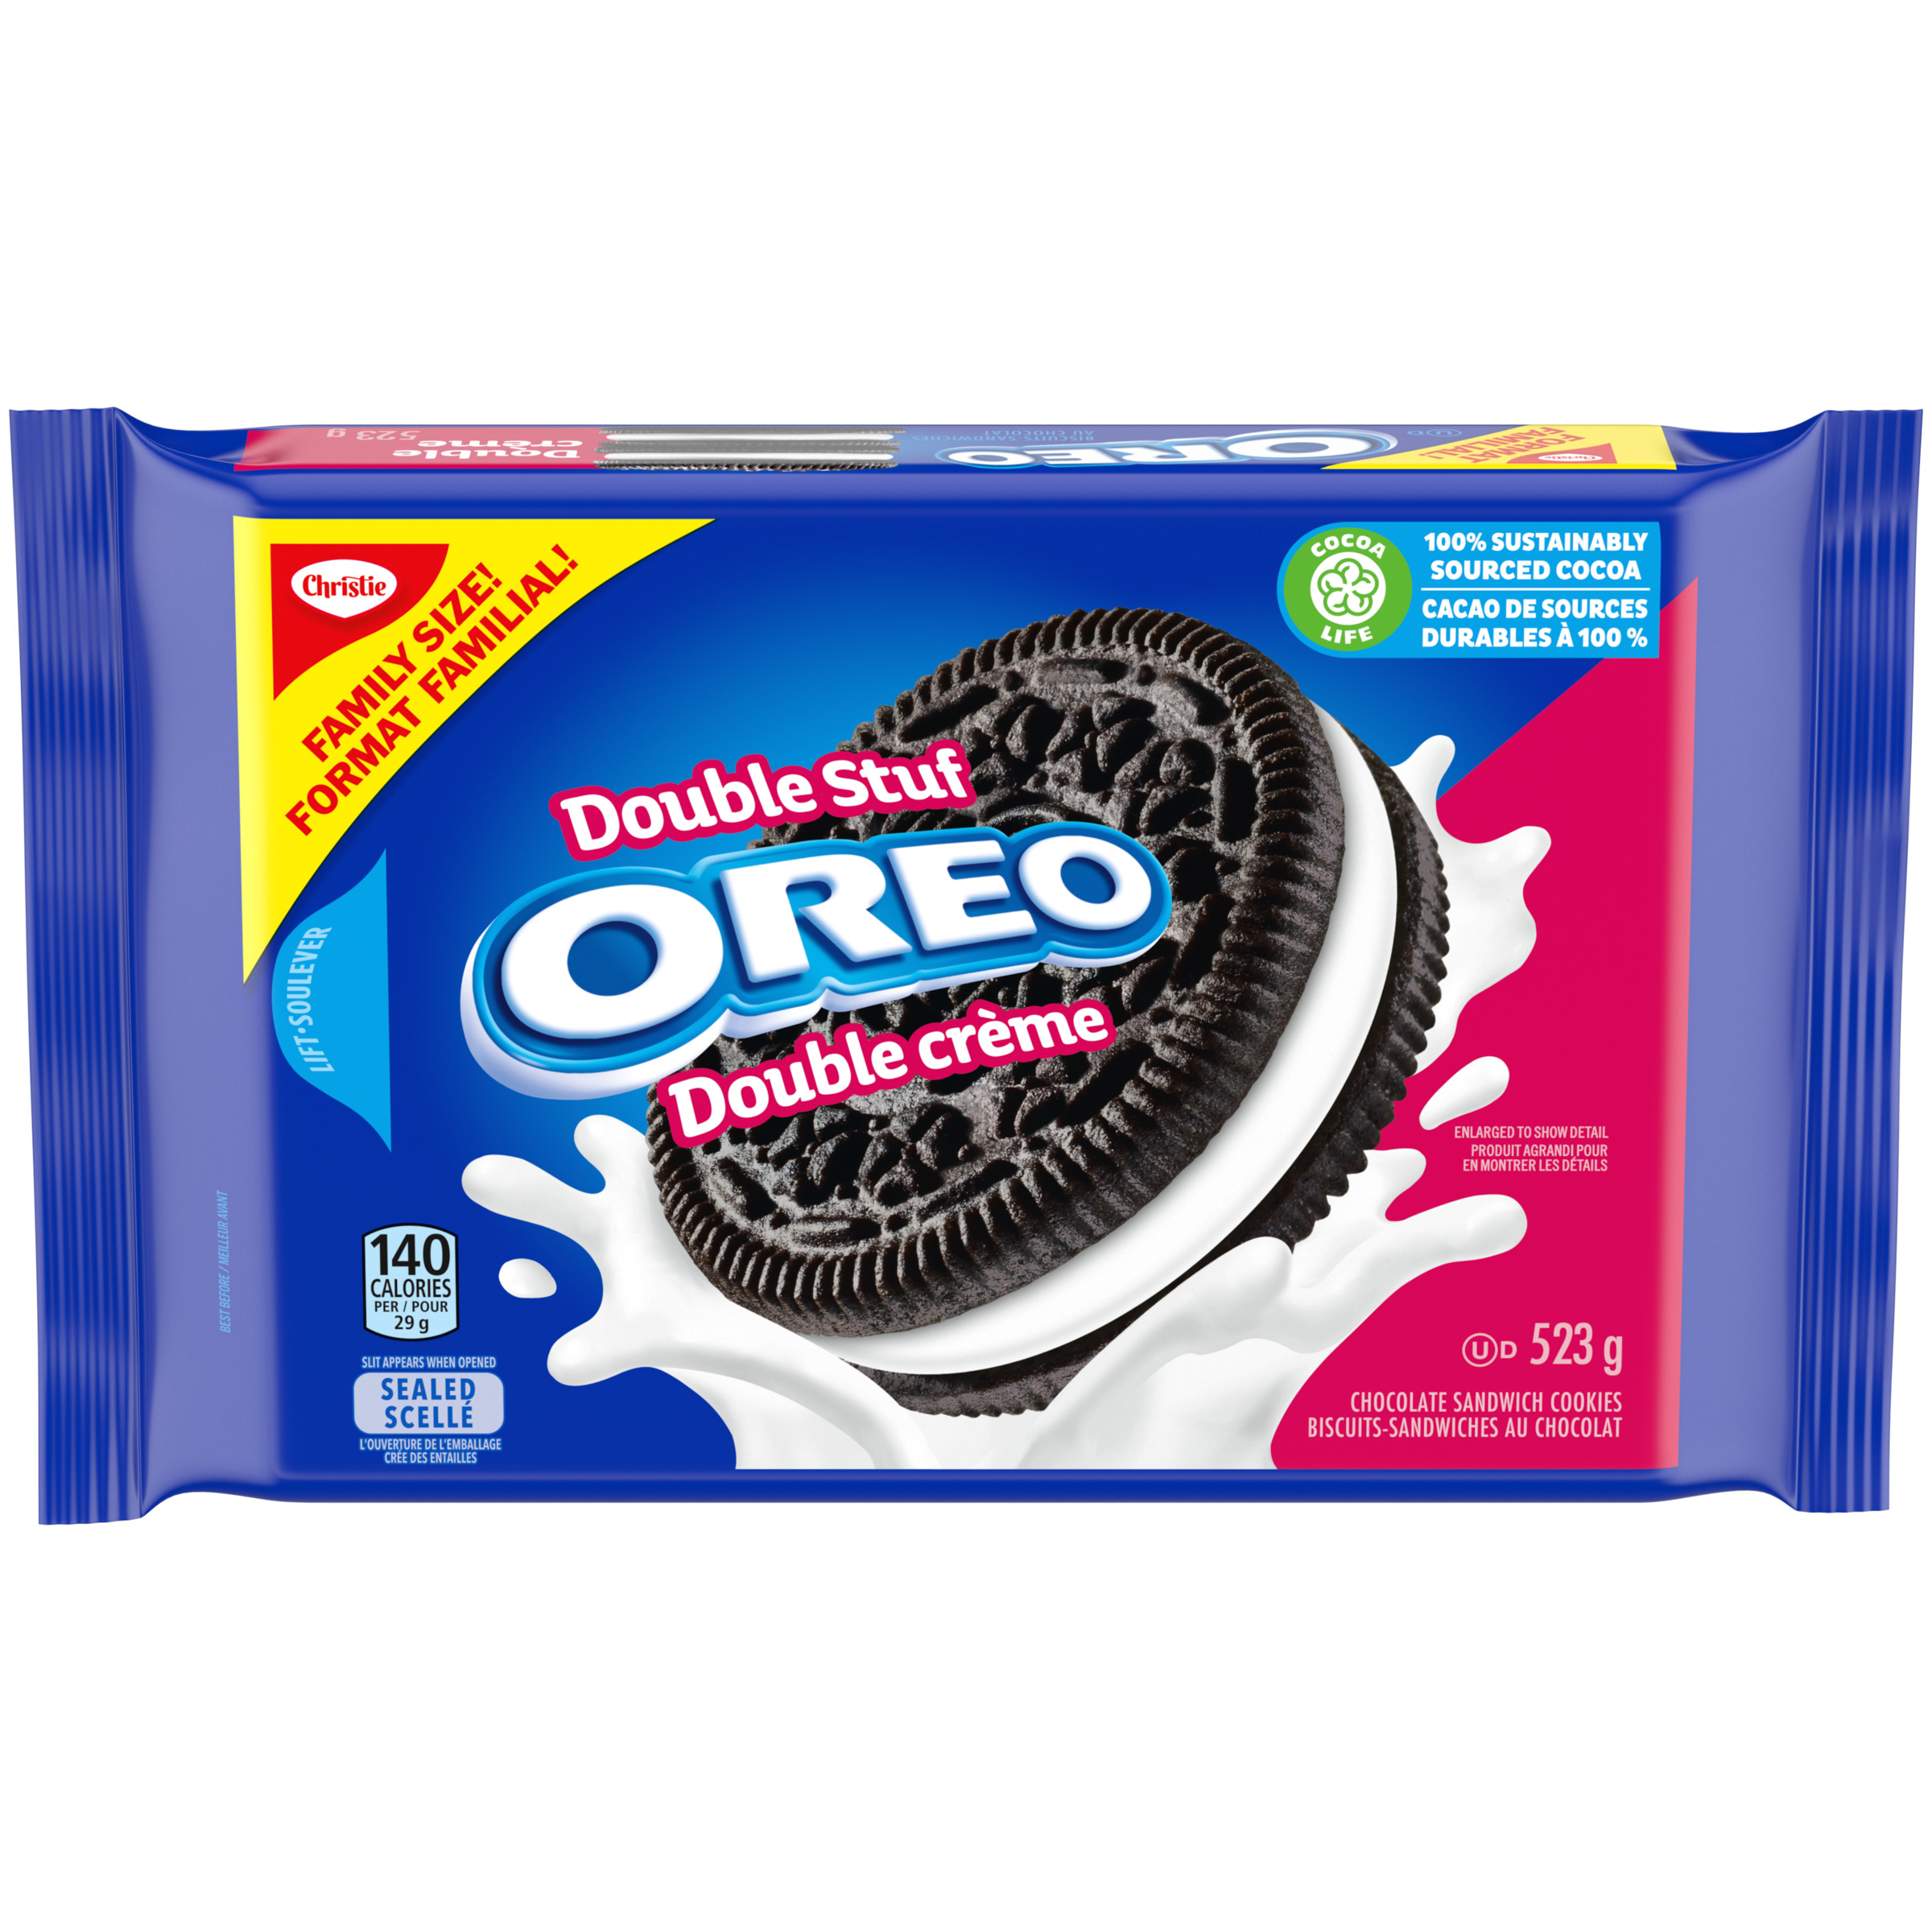 OREO Double Stuf Sandwich Cookies, Family Size, Resealable Pack, 523 g